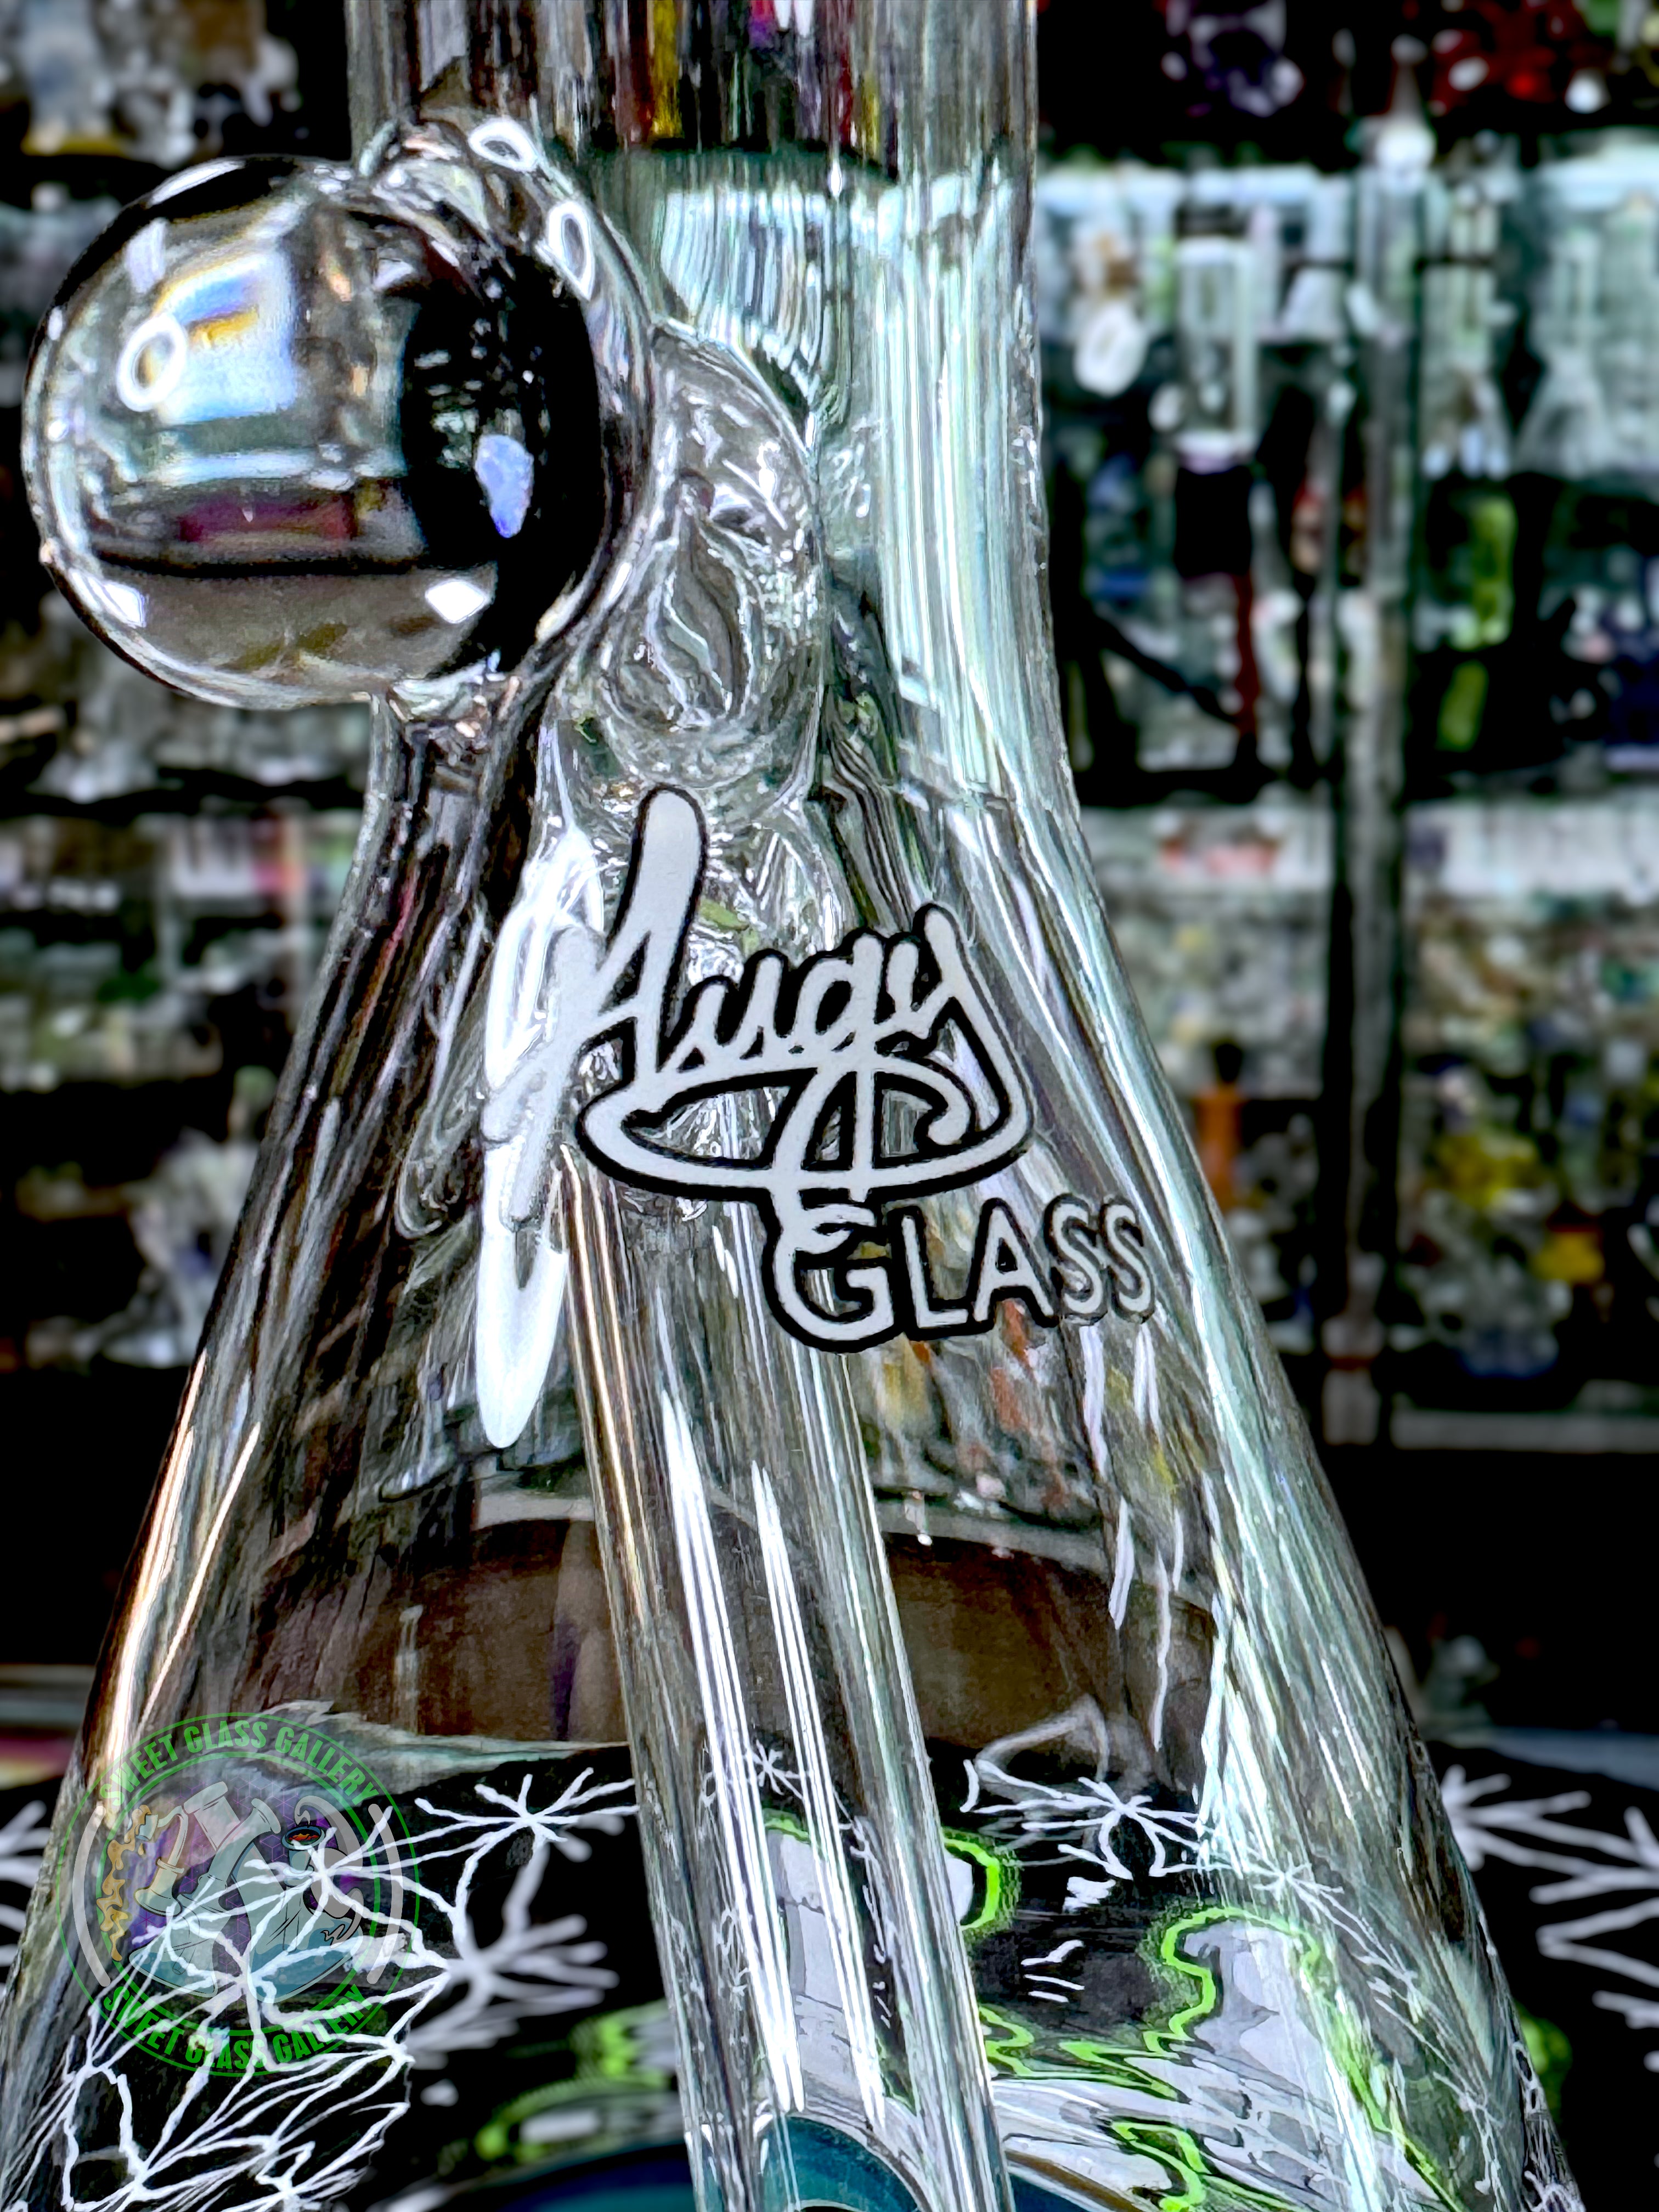 Augy Glass - Wigwag Jammer Rig